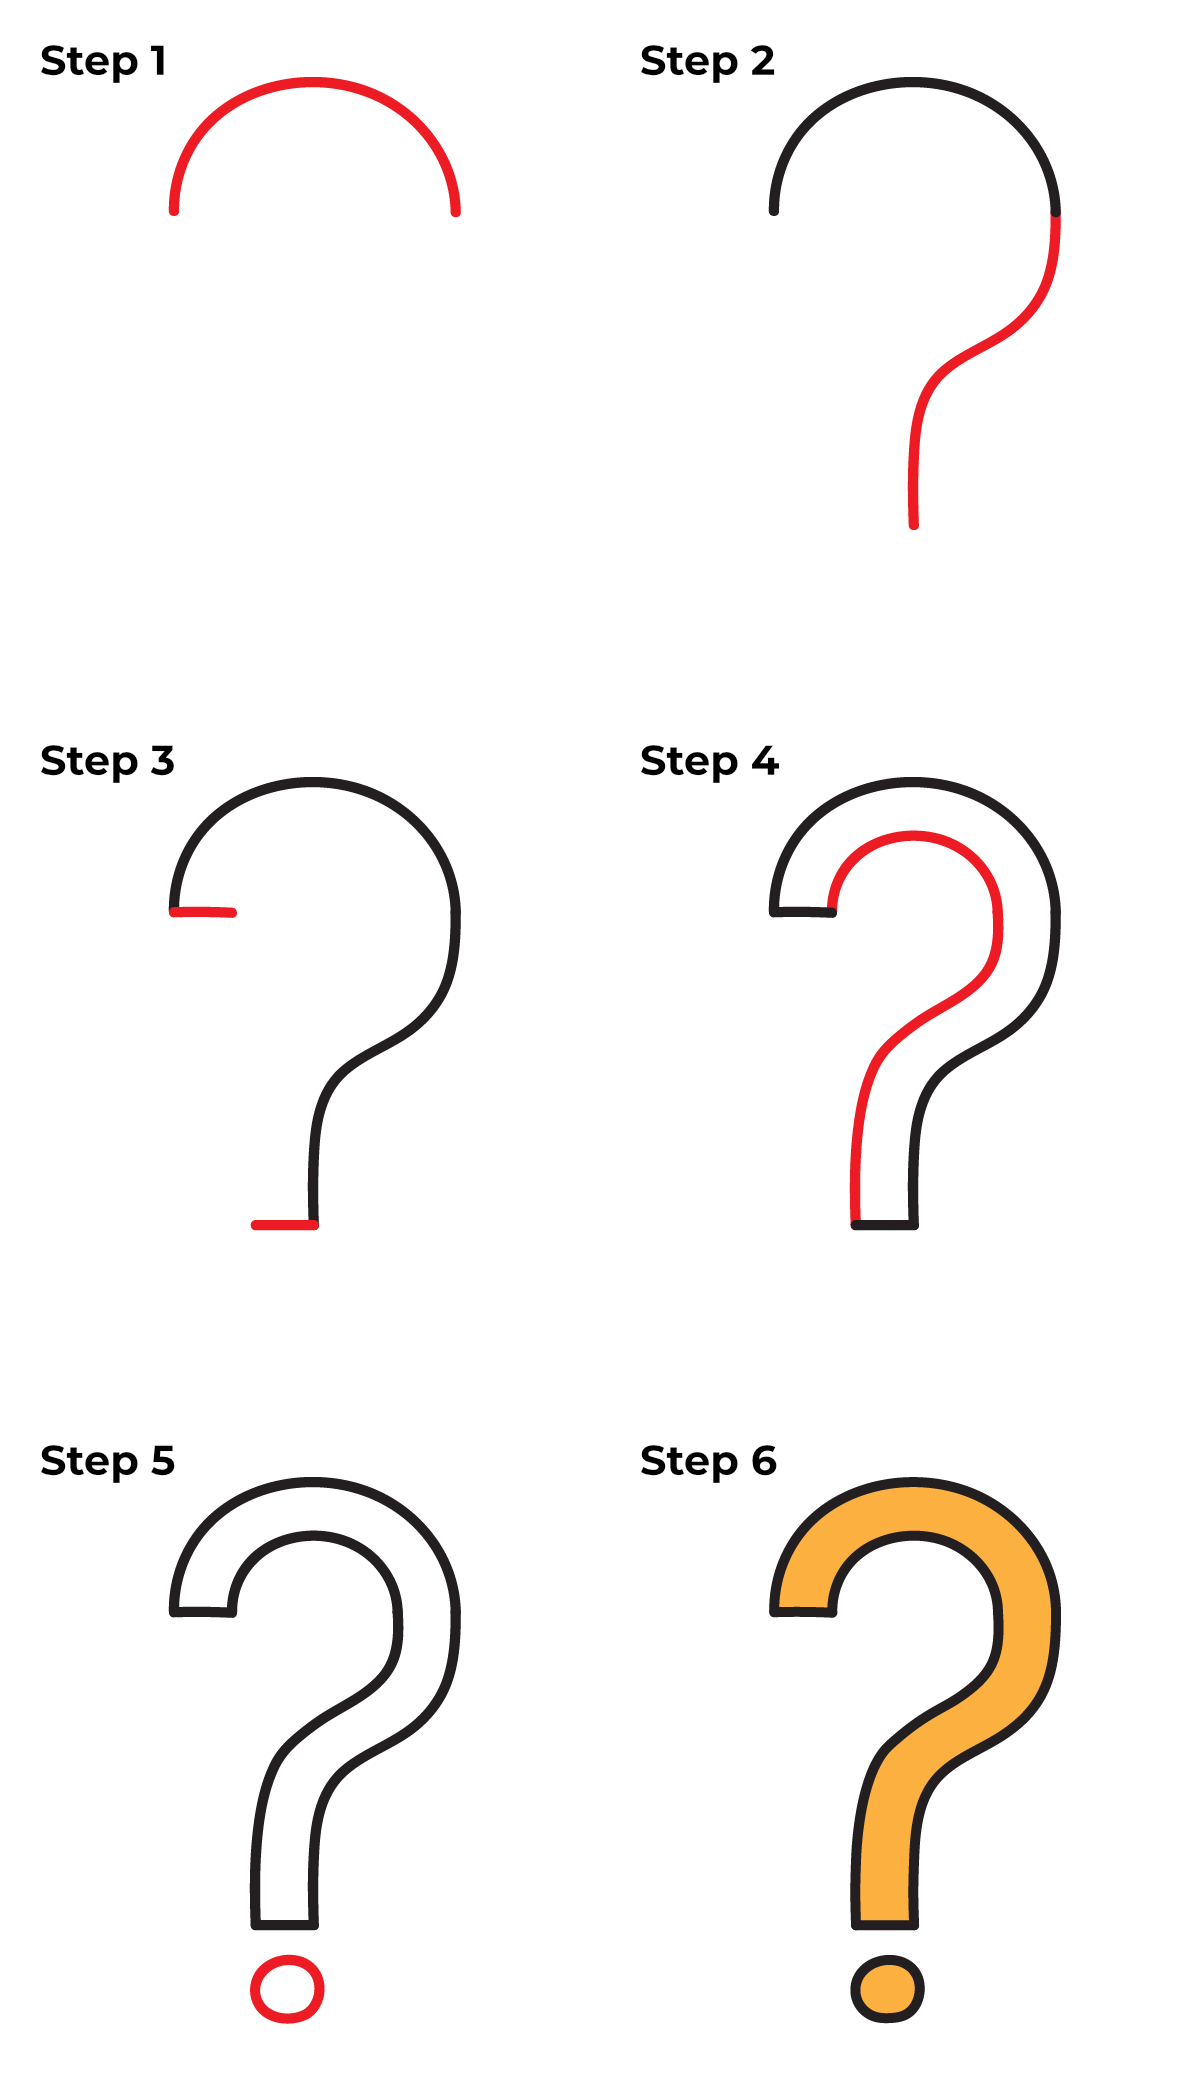 How to Draw a Question Mark - Printable Tutorial